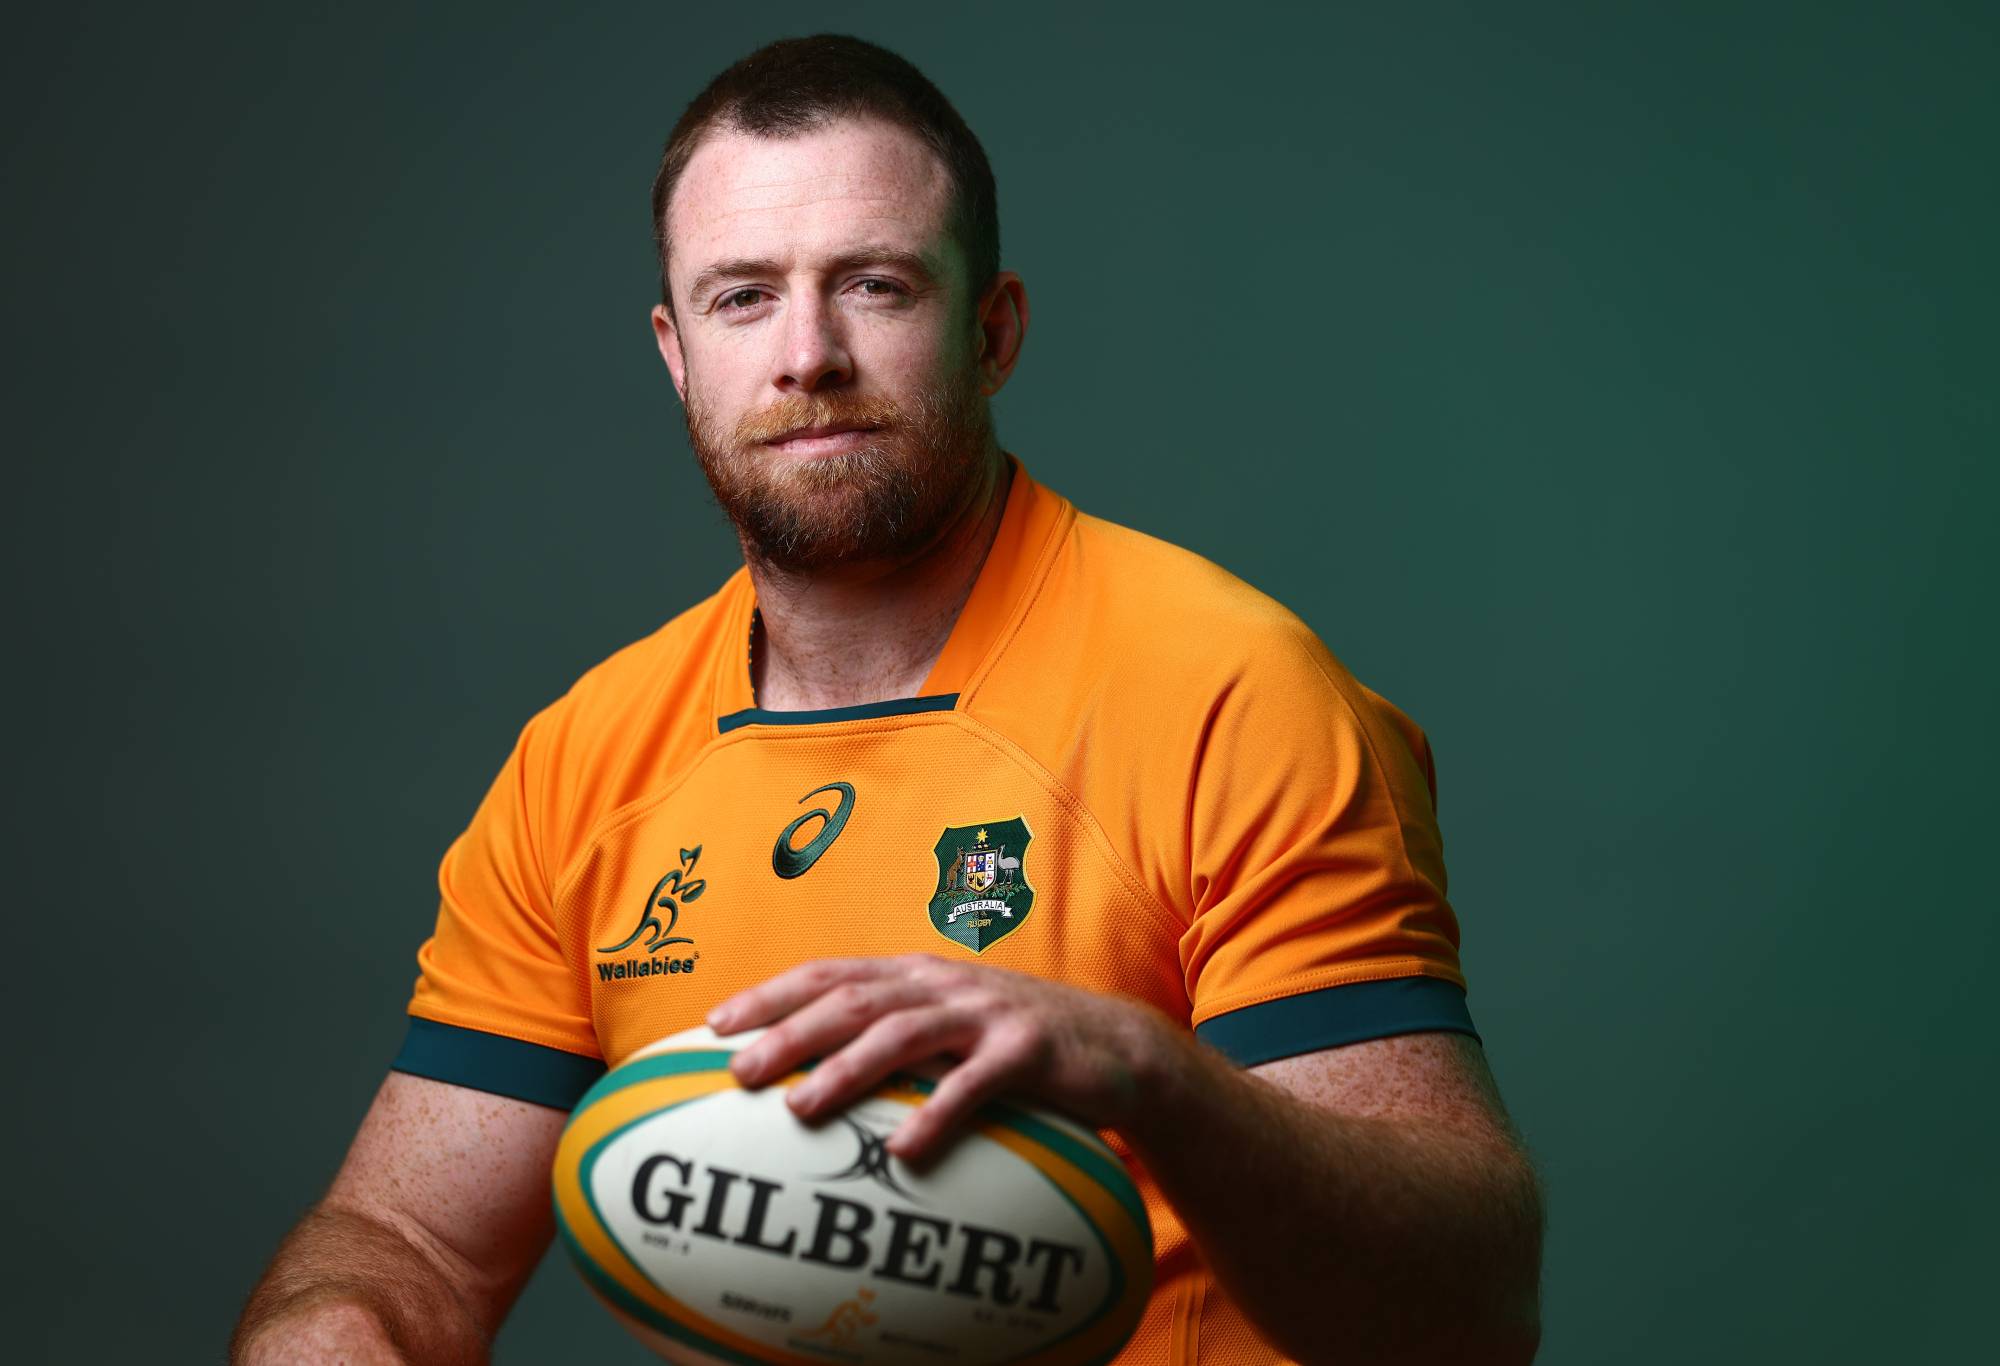 Jed Holloway poses during the Australian Wallabies 2022 team headshots session on June 24, 2022 in Sunshine Coast, Australia. (Photo by Chris Hyde/Getty Images for Rugby Australia)